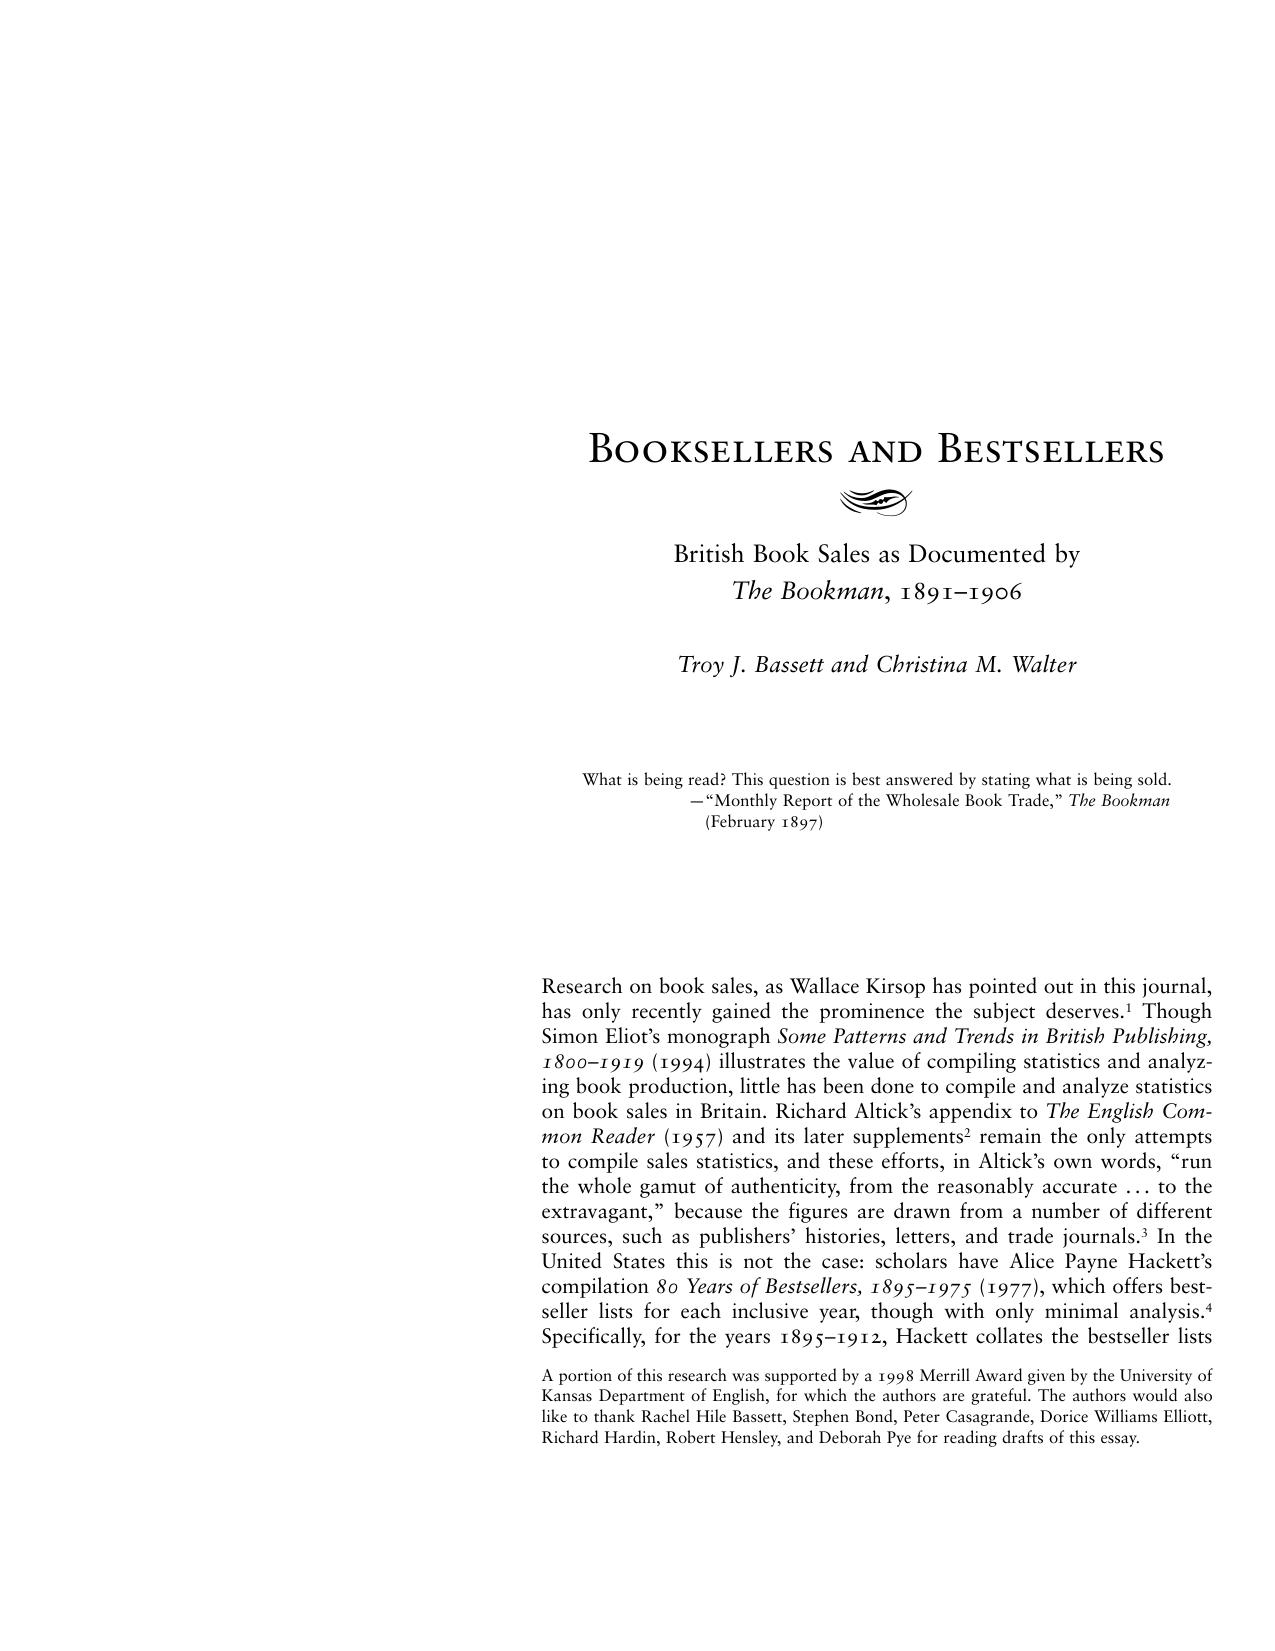 British Book Sales as Documented by The Bookman, 1891â1906 by Troy J. Bassett